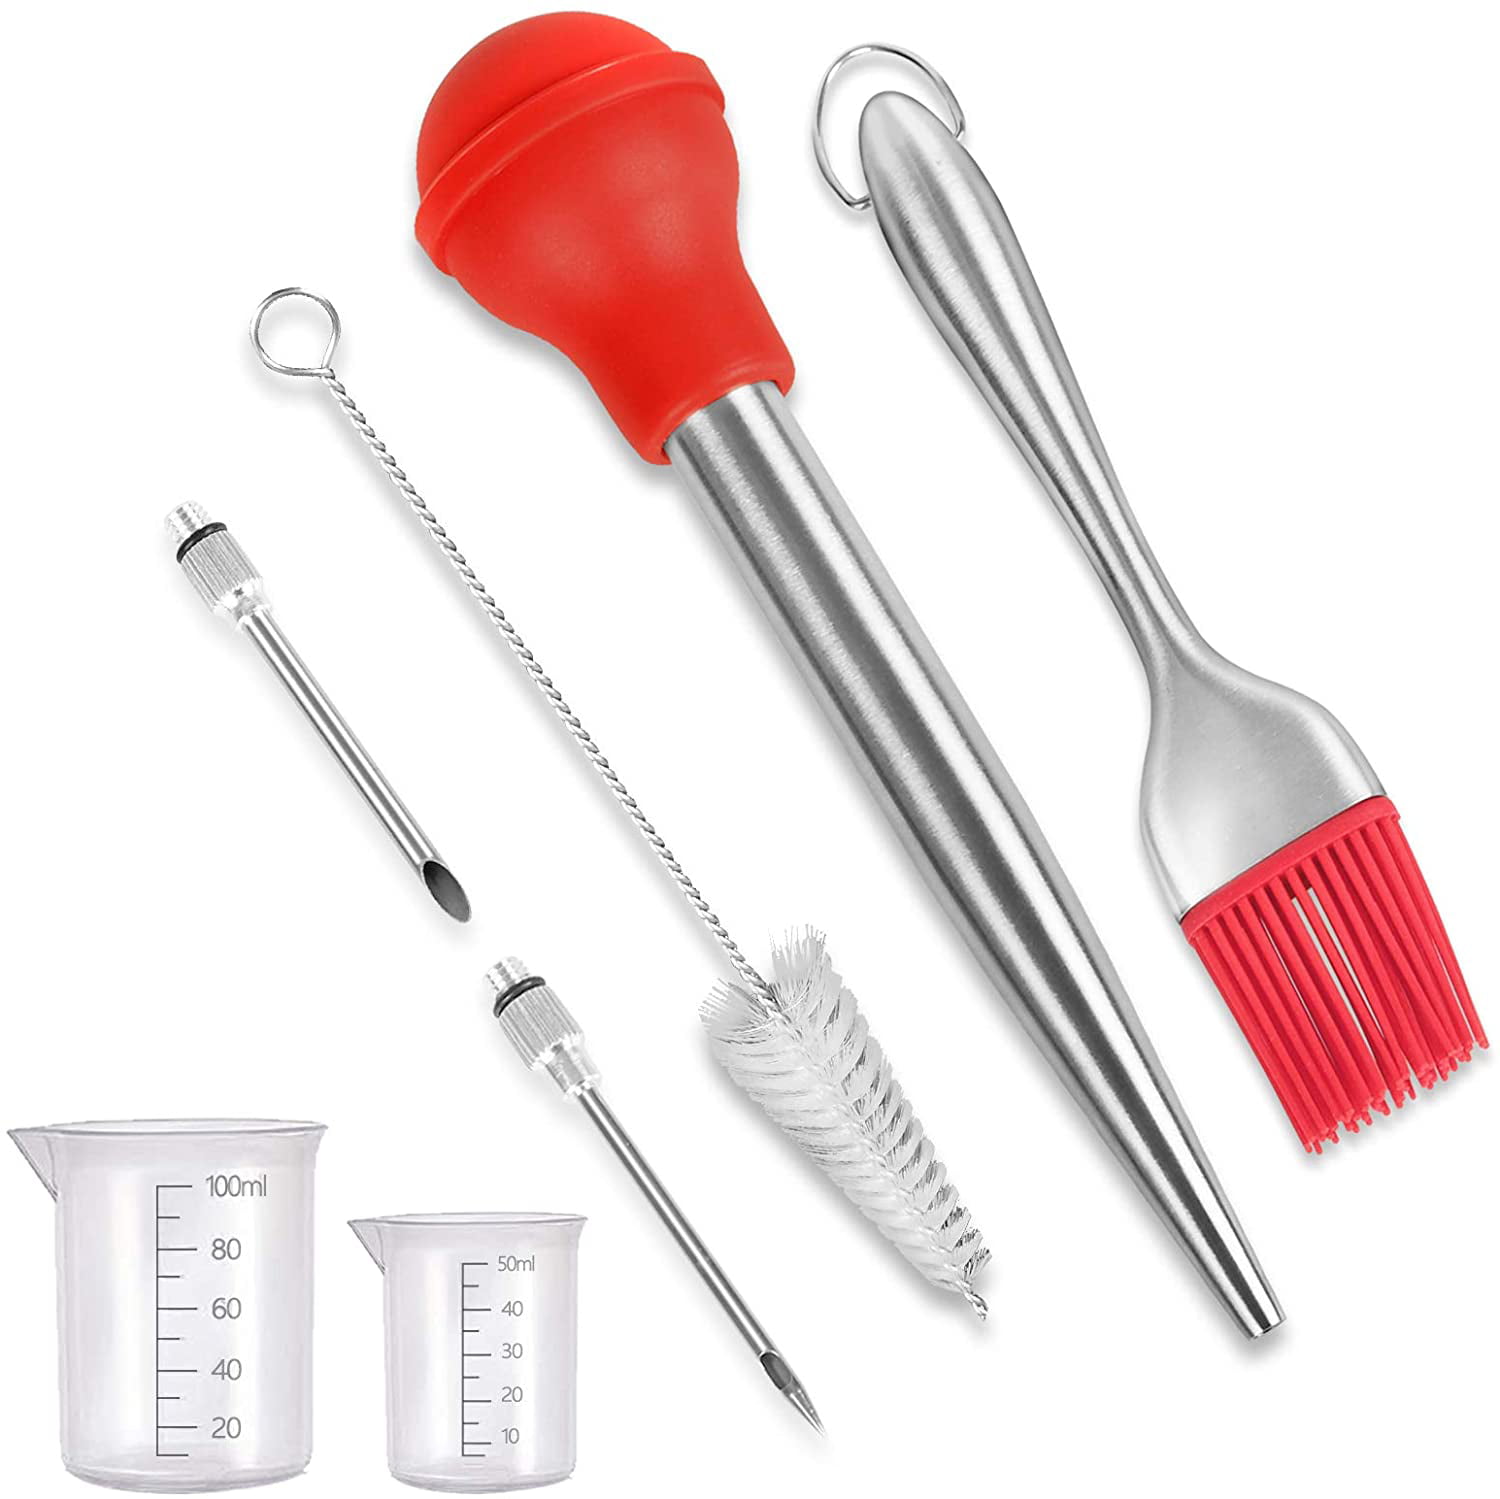 Stainless Steel Turkey Tool Marinade Seasoning Injector with Silicone Pump for Cooking BBQ Grill Turkey Baster Syringe